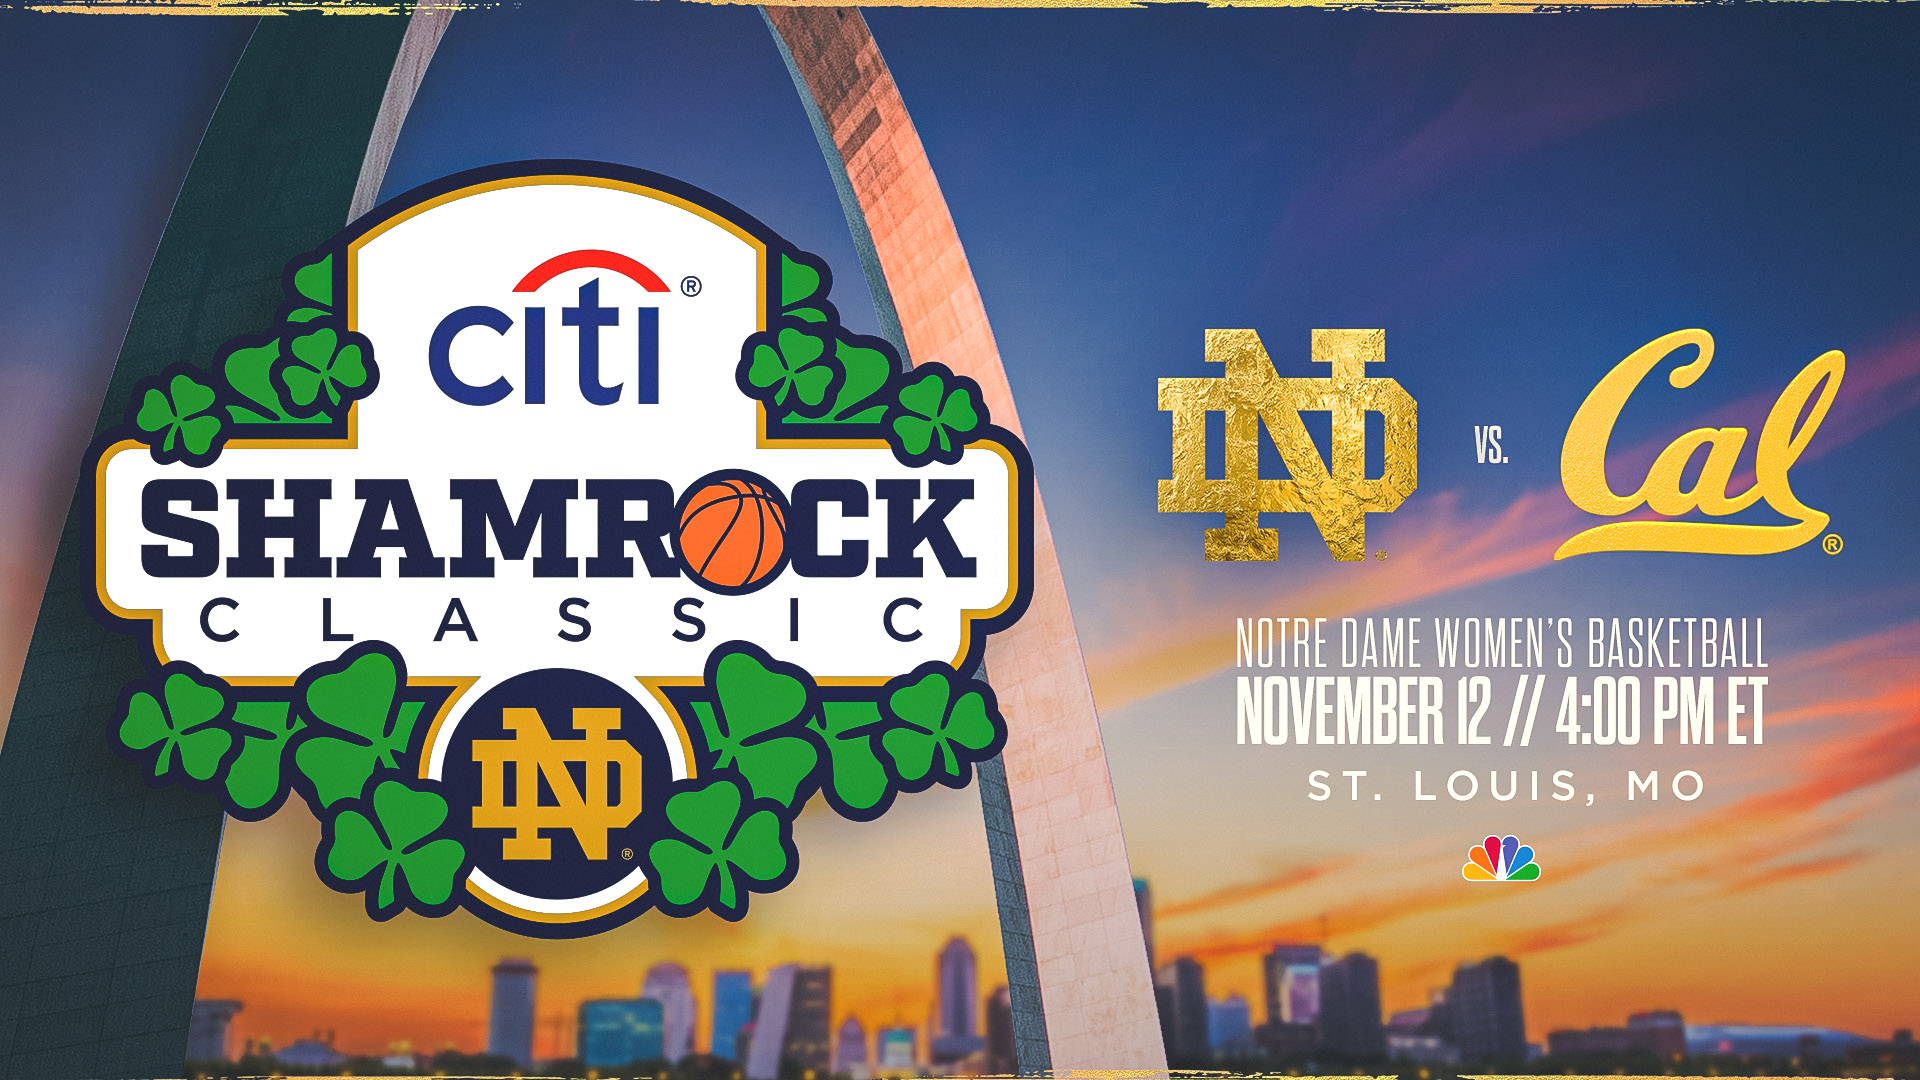 St. Louis Blues And St. Louis Sports Commission Announce Notre Dame vs Cal Women’s Basketball Game to be Played November 12 at Enterprise Center in St. Louis